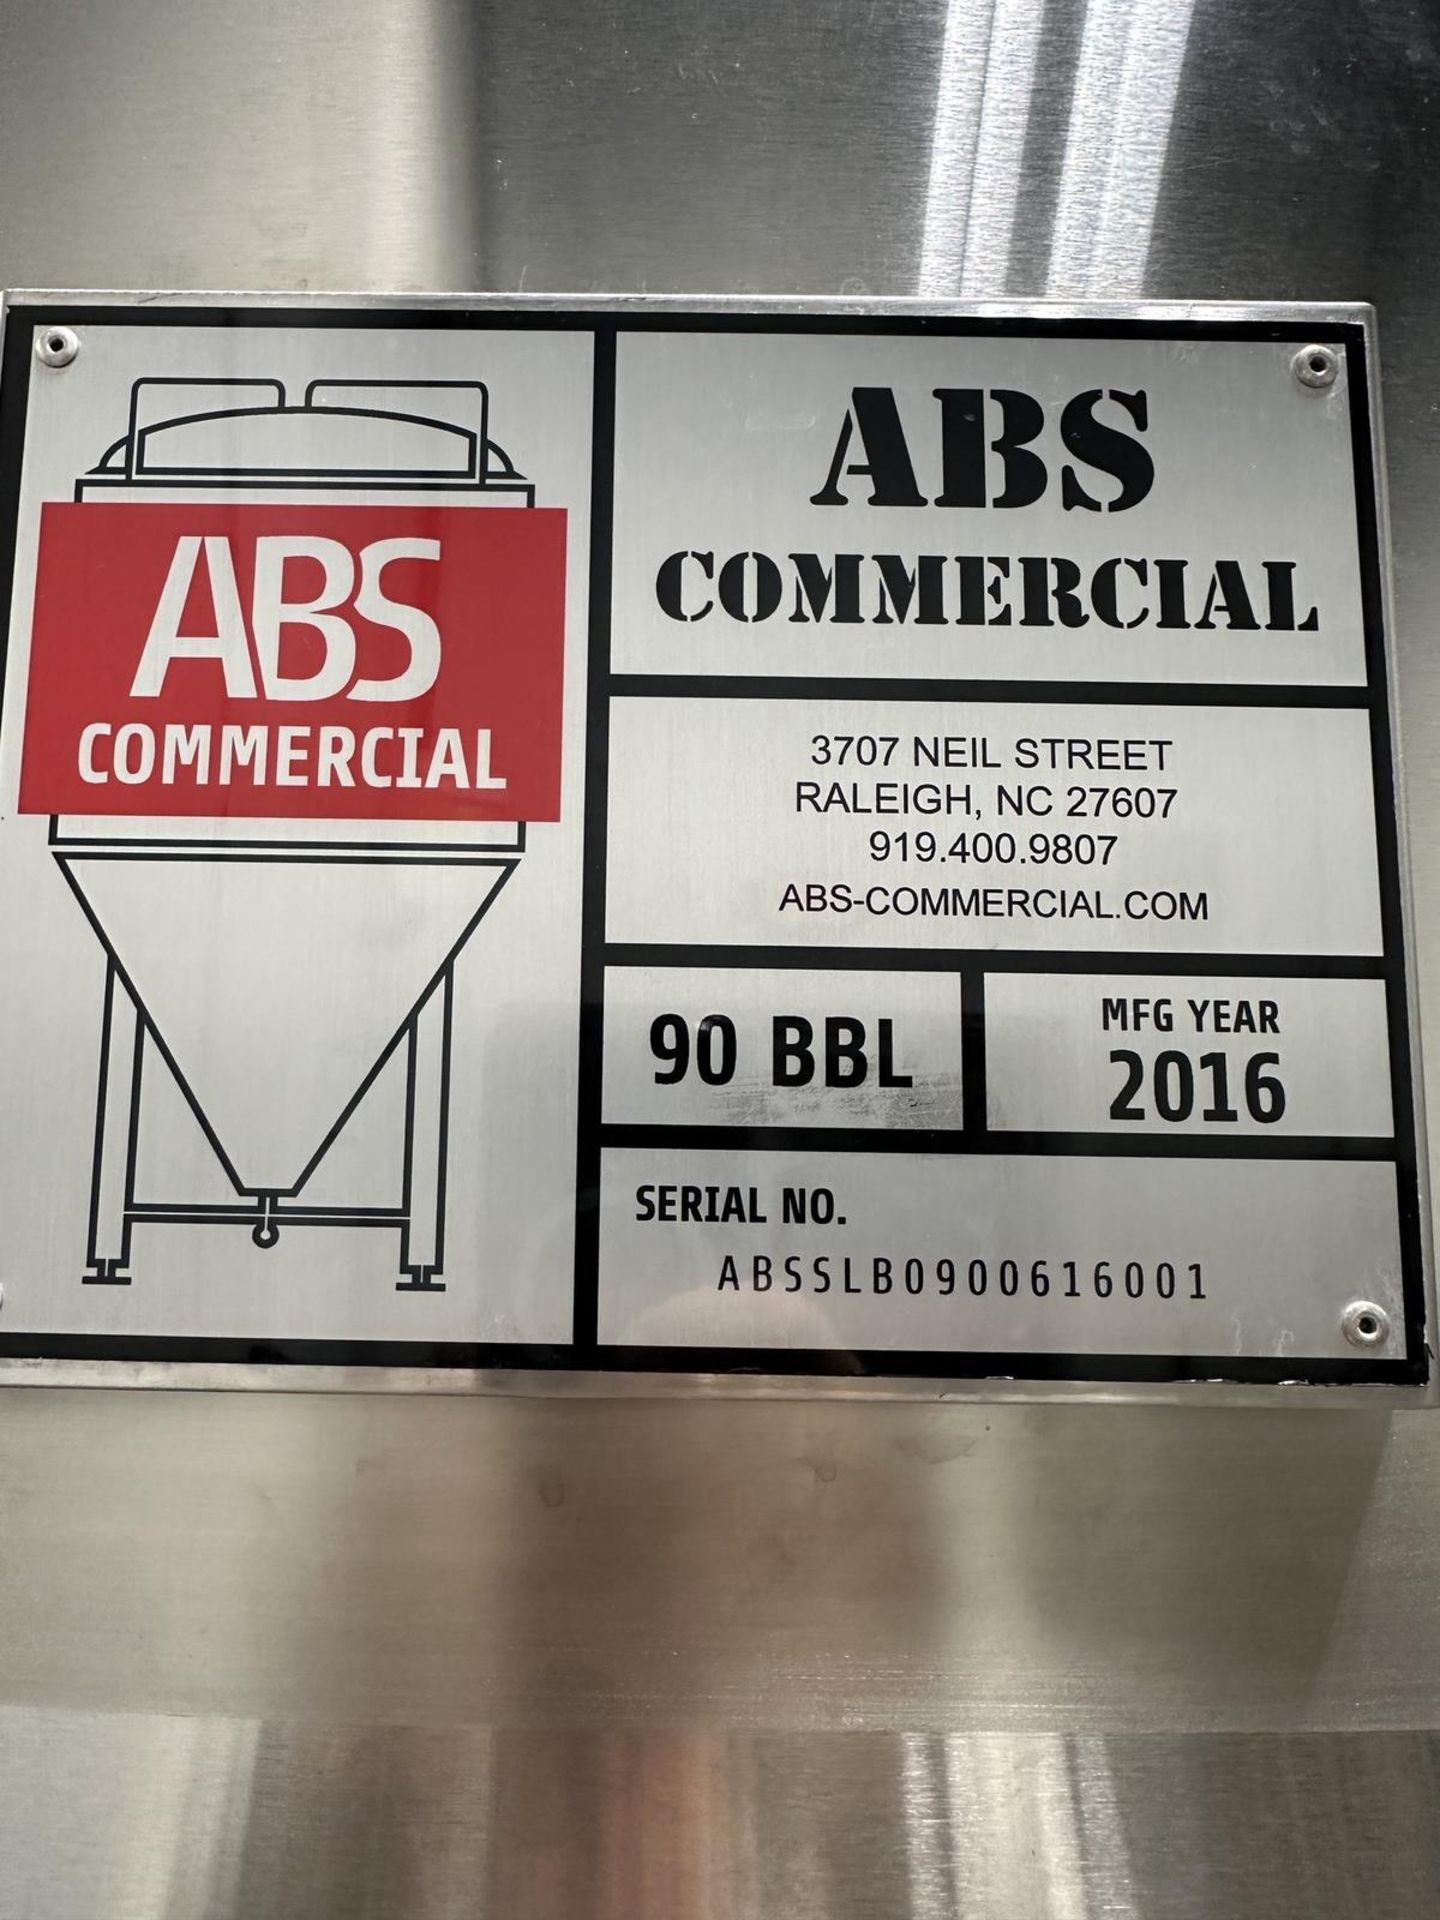 2016 ABE 90 BBL Jacketed Brite Tank s/n ABSSLB0900616001 Approx. 13' H x 7' OD | Rig Fee $2600 - Image 3 of 3